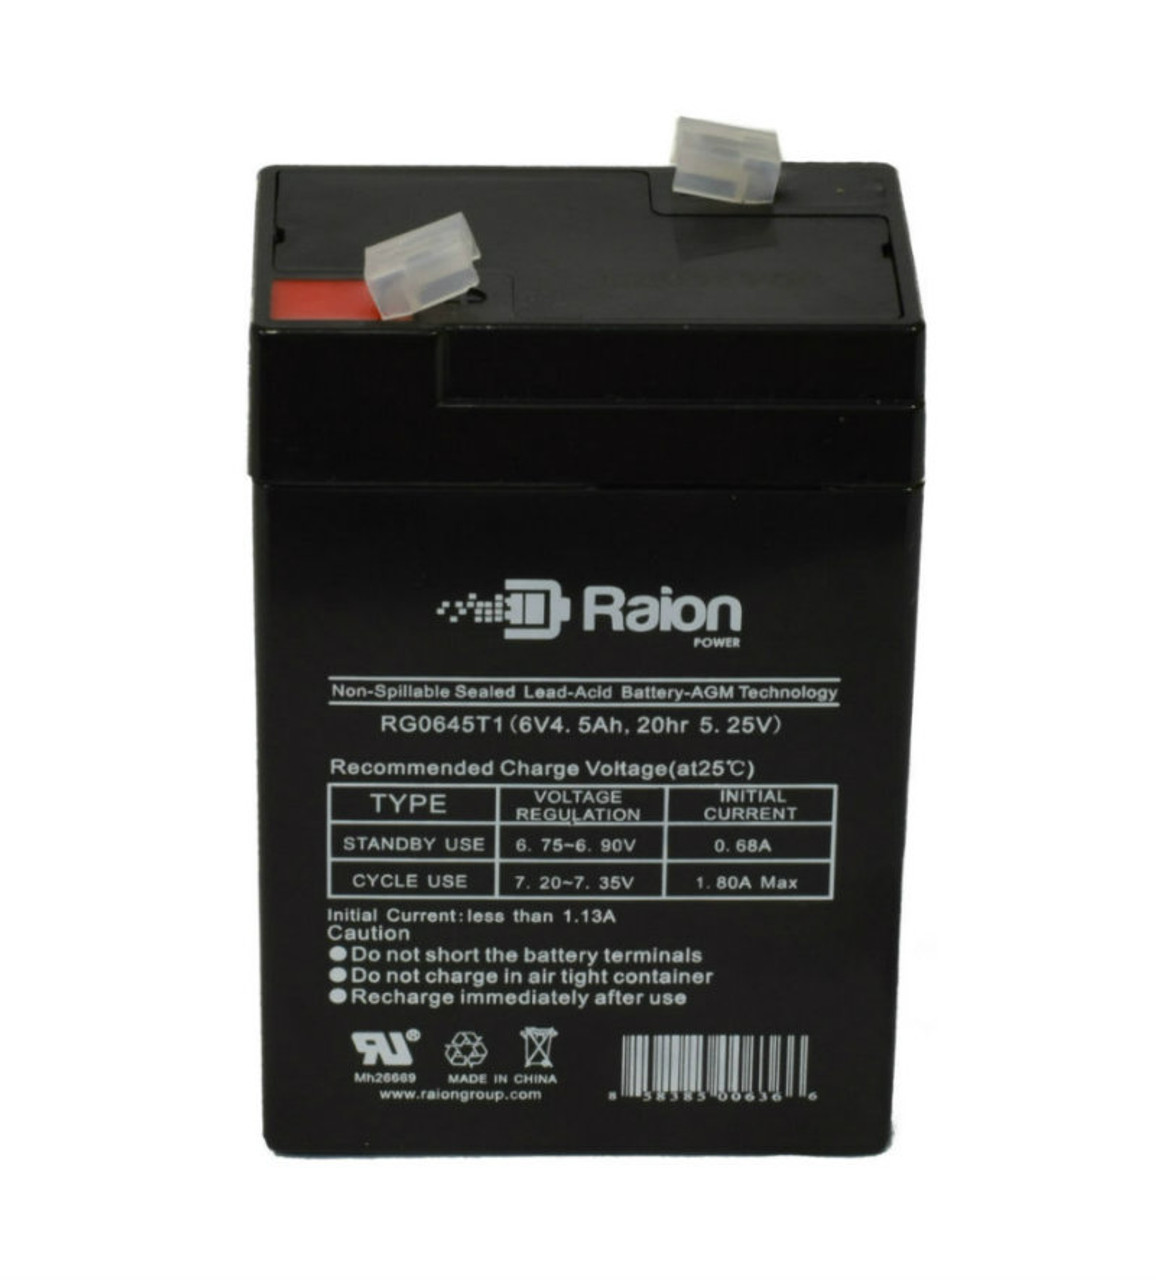 Raion Power RG0645T1 Replacement Battery Cartridge for Dual-Lite SL1